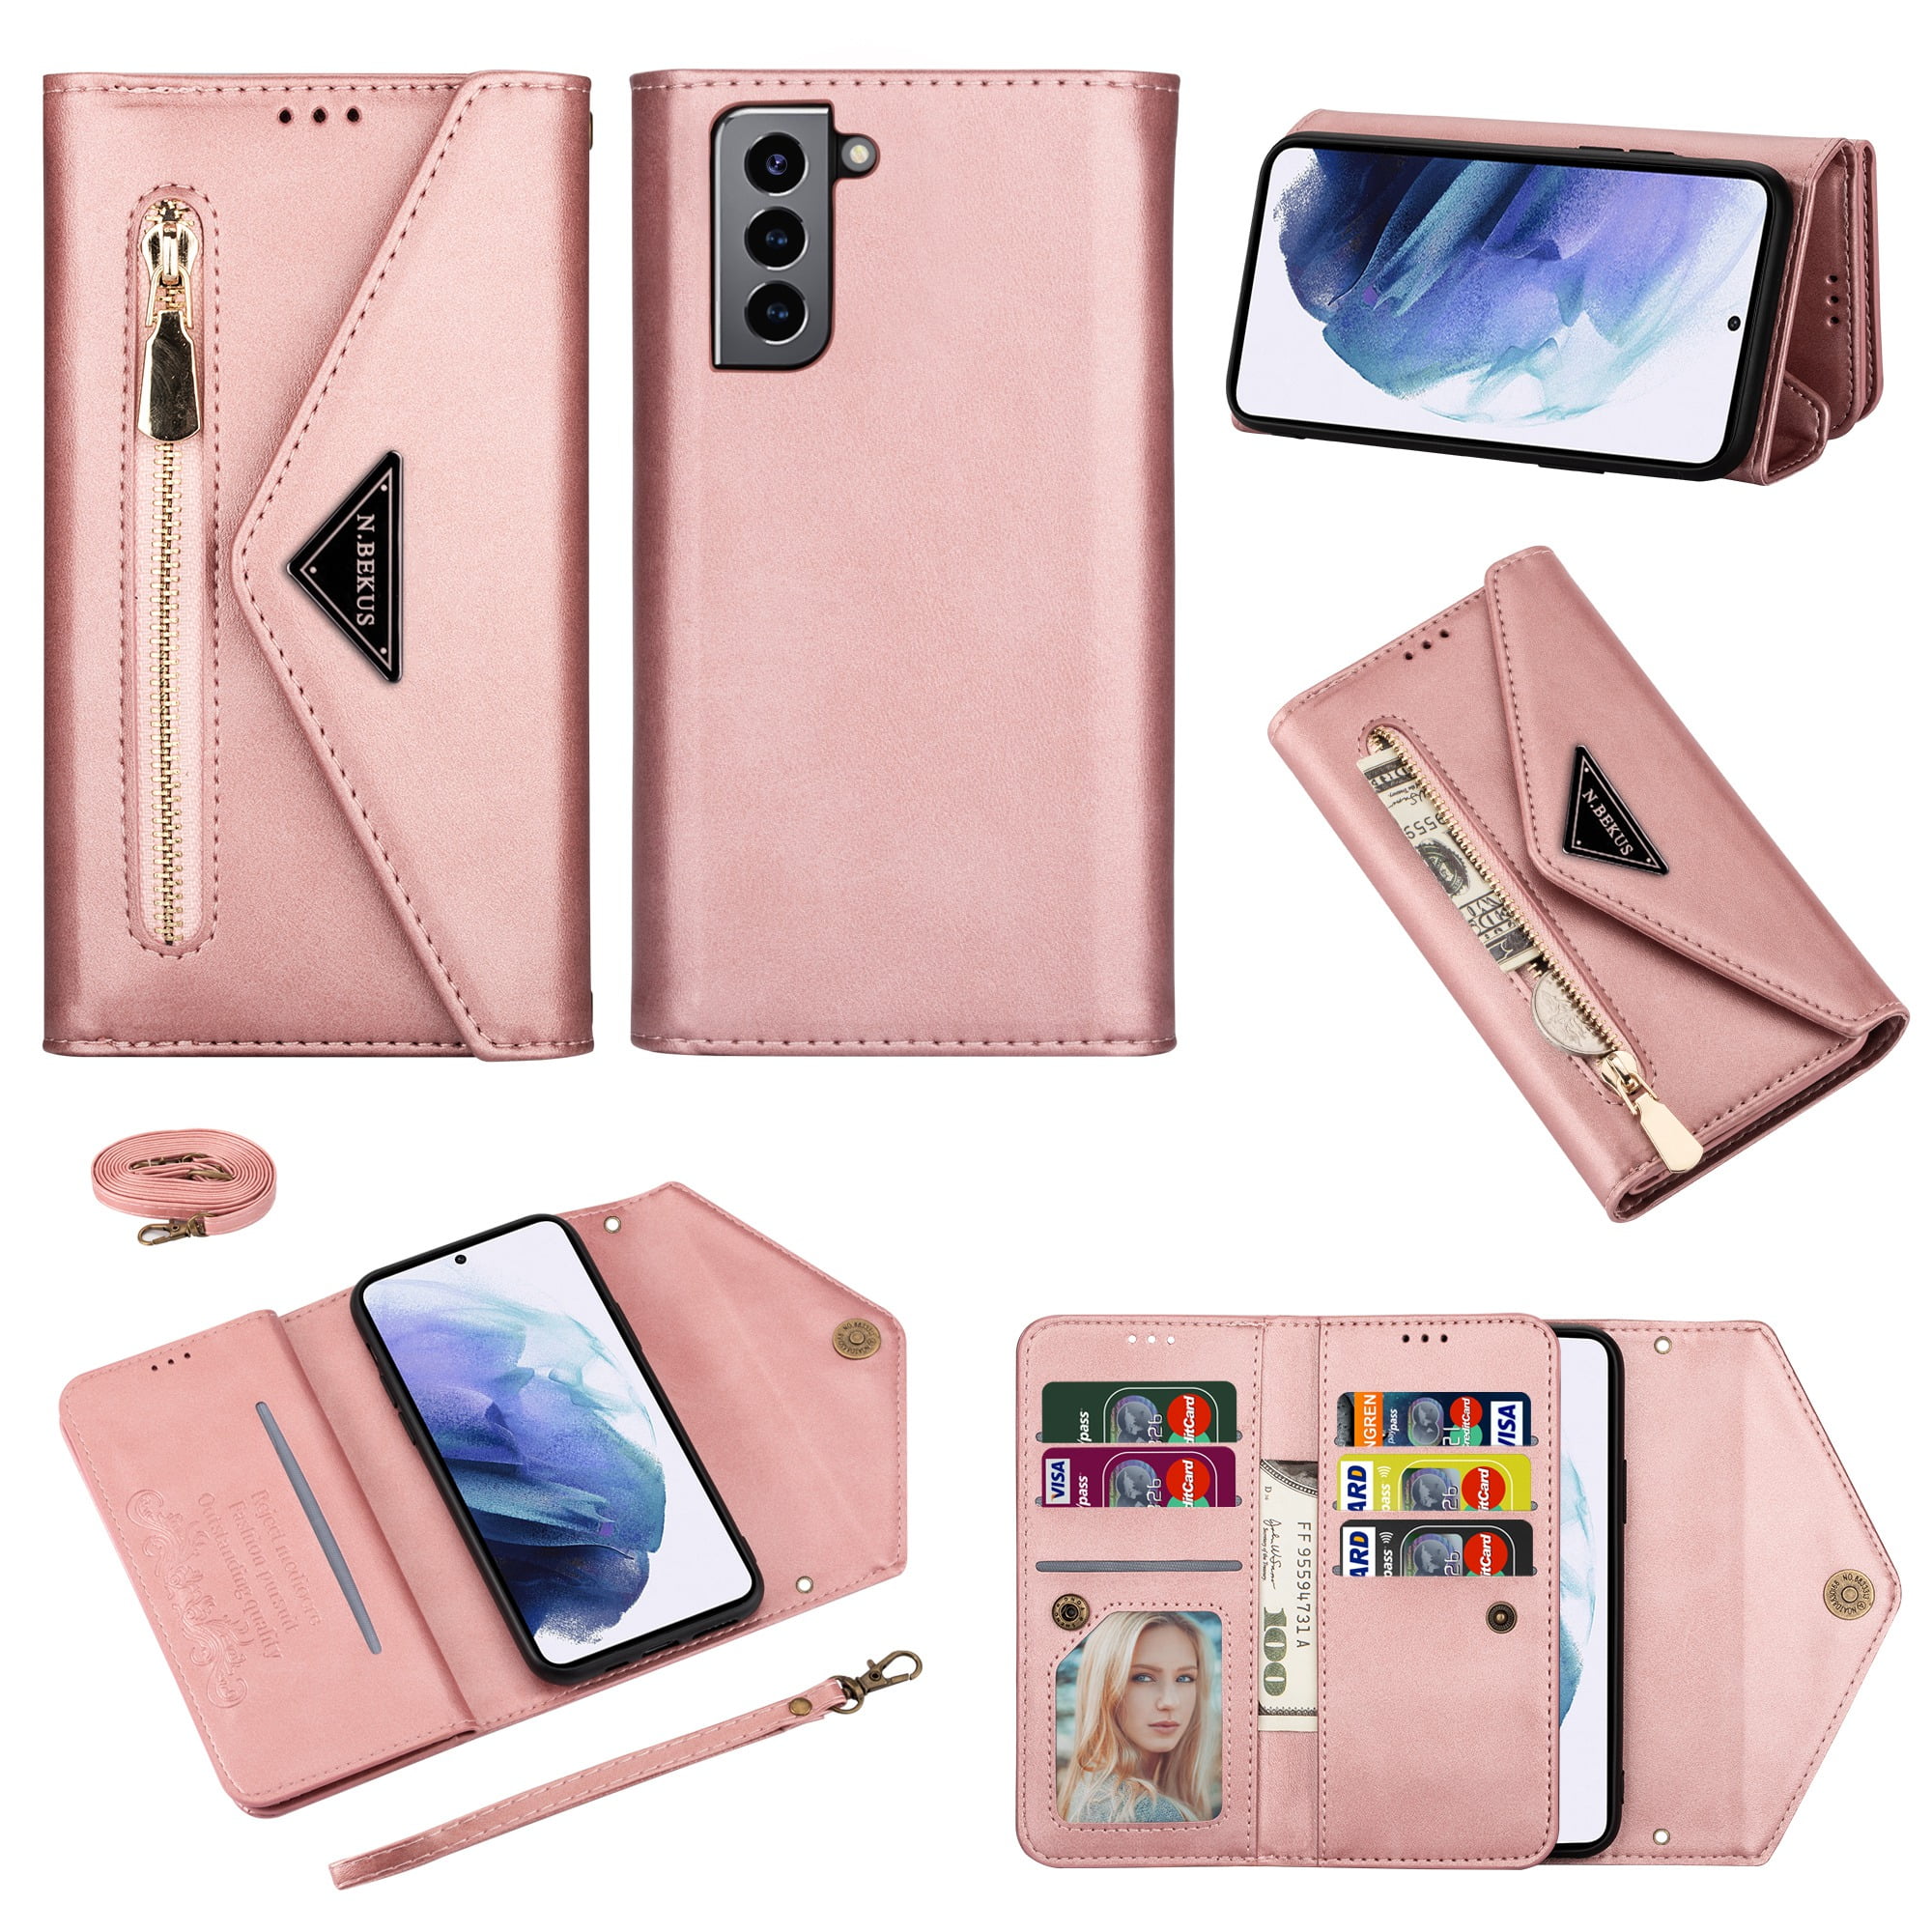 Strap Leather Case for Samsung Galaxy S21 5G,Rose Gold Silicone Flip Case for Samsung Galaxy S21 5G,Herzzer Premium Cute Butterfly Tree Cat Embossed Stand Wallet Folio Smart Case